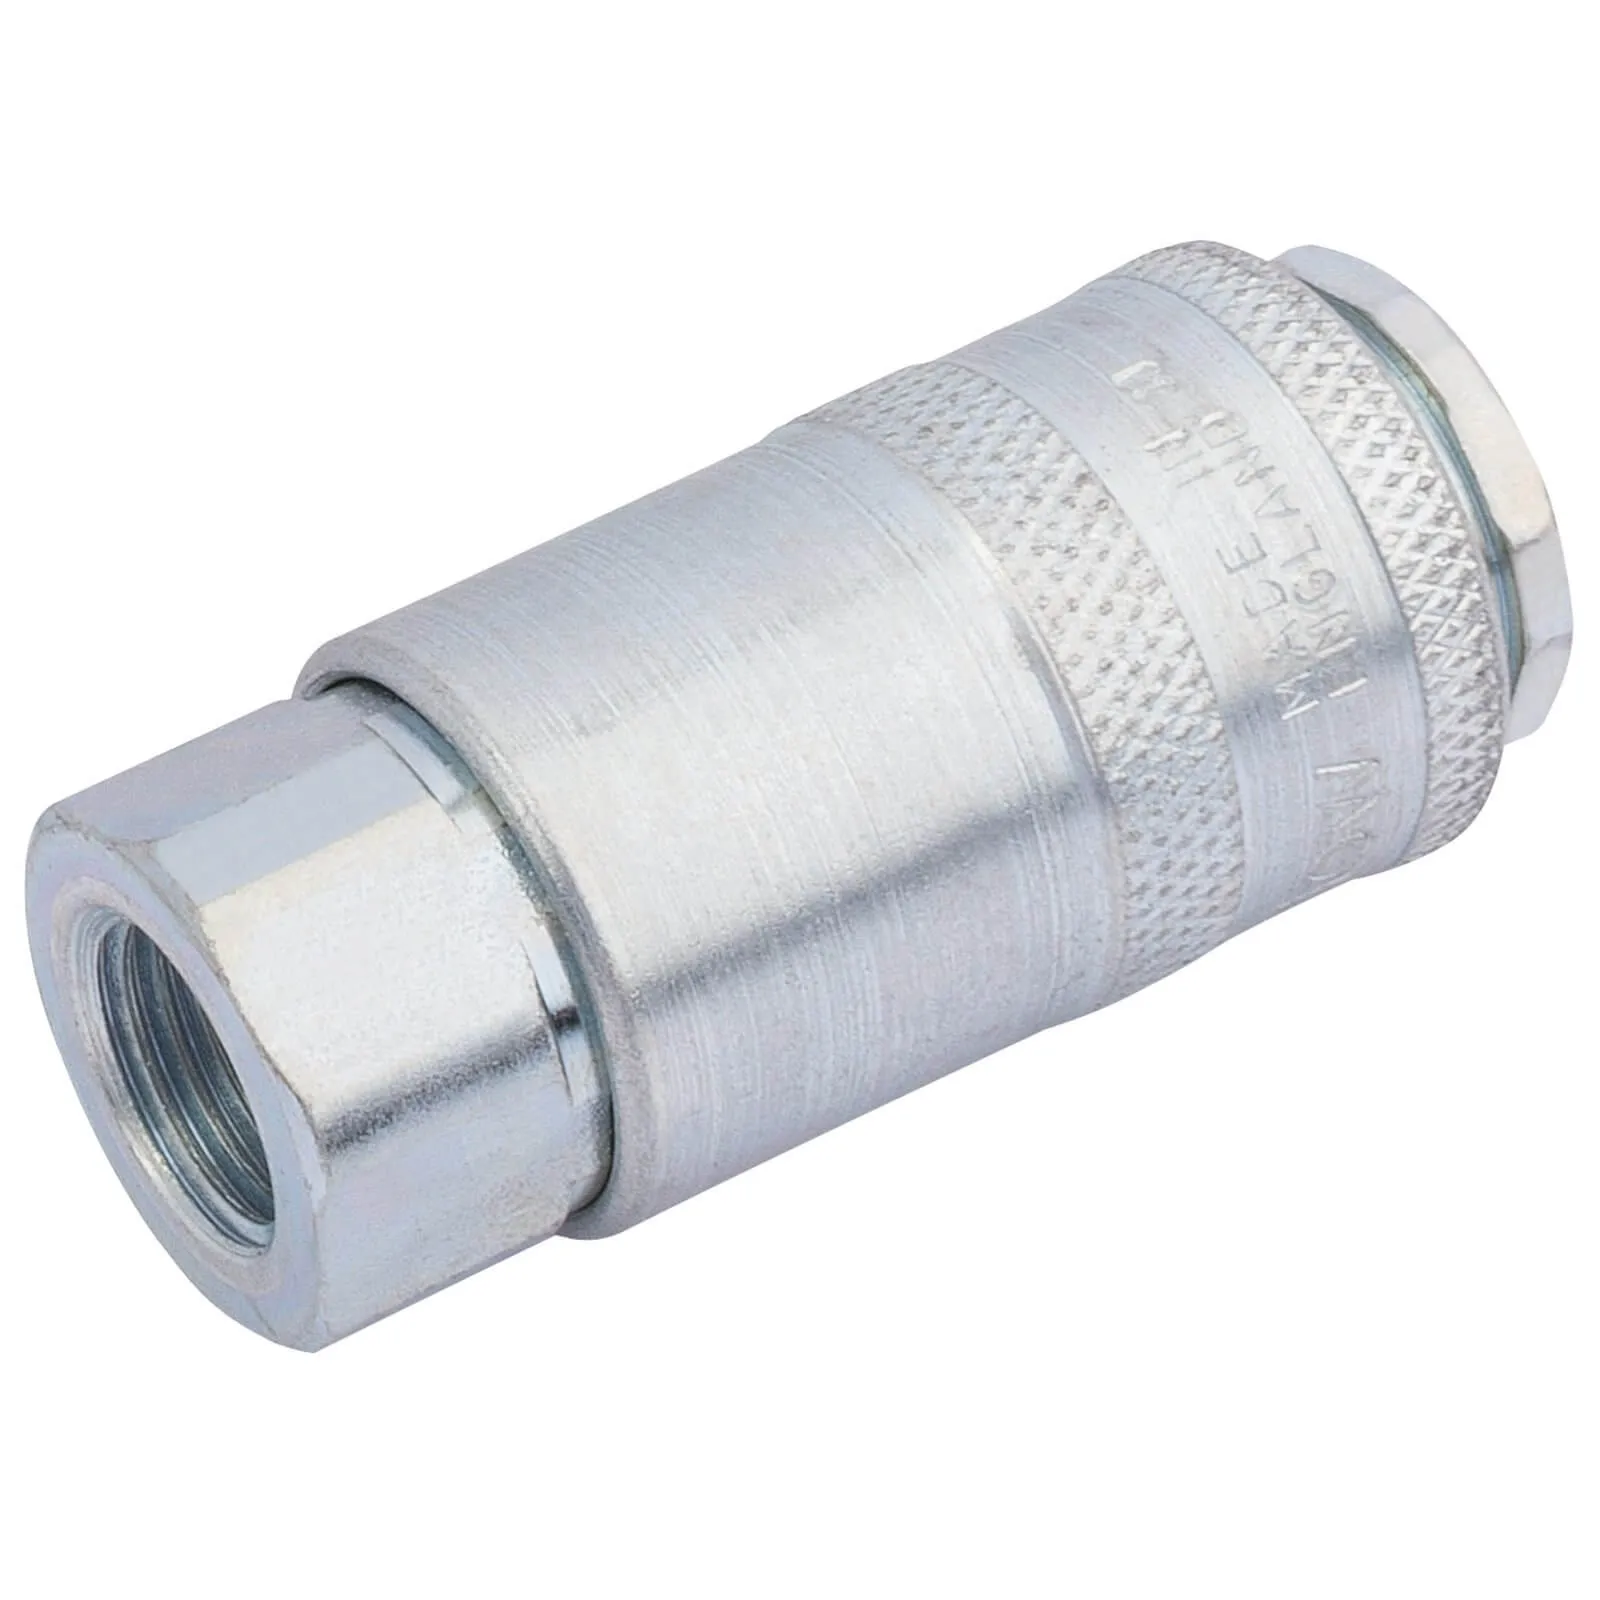 Draper PCL Airflow Coupling Parallel Female Thread - 1/4" Bsp, Pack of 1